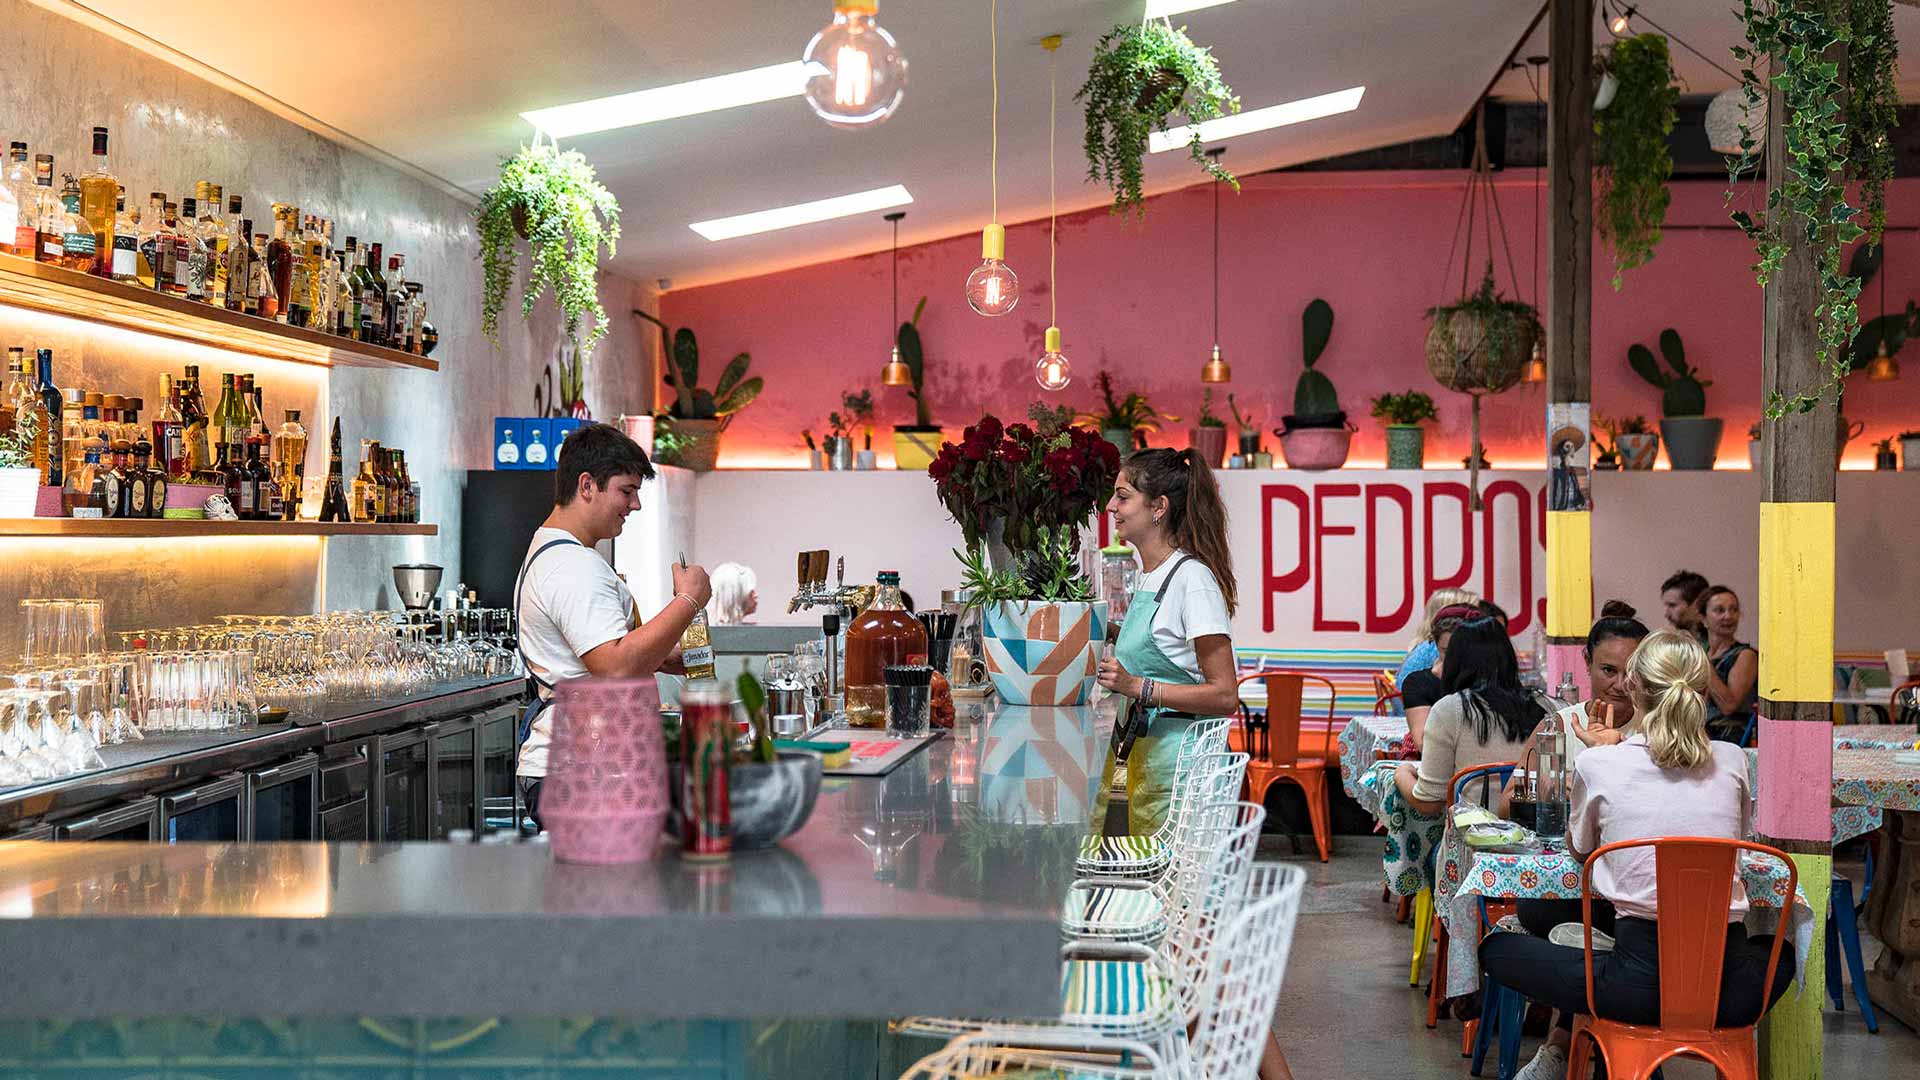 Don Pedros Is Paddington's Festive New Mexican Joint Serving Up All-You-Can-Eat Tacos